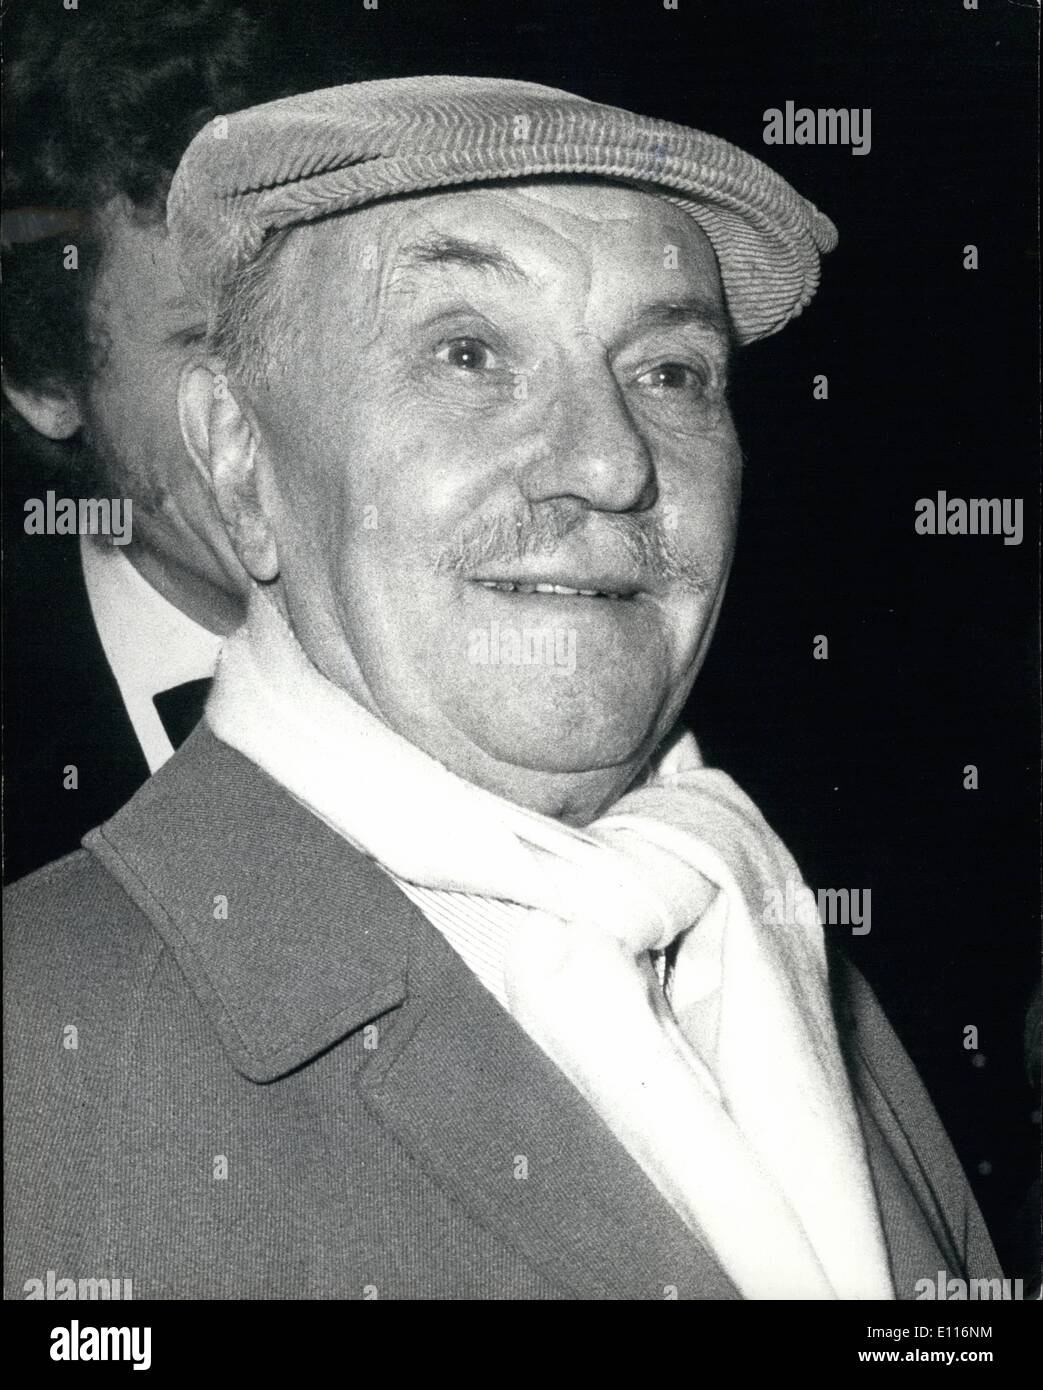 Mar. 03, 1976 - The Public Opening Of London's New National Theatre:' Many famous personalities were present at the Public opening of the Lyttelton Theatre, part of London's new National Theatre on the South Bank, last night. to see Peter Hall's production of Hamlet with Albert Finney in the title role. Princess Margaret was among the guests. Photo Shows Actor Sir Ralph Richardson sport a cap and scarf as he arrive for the public opening of the theatre last night. Stock Photo